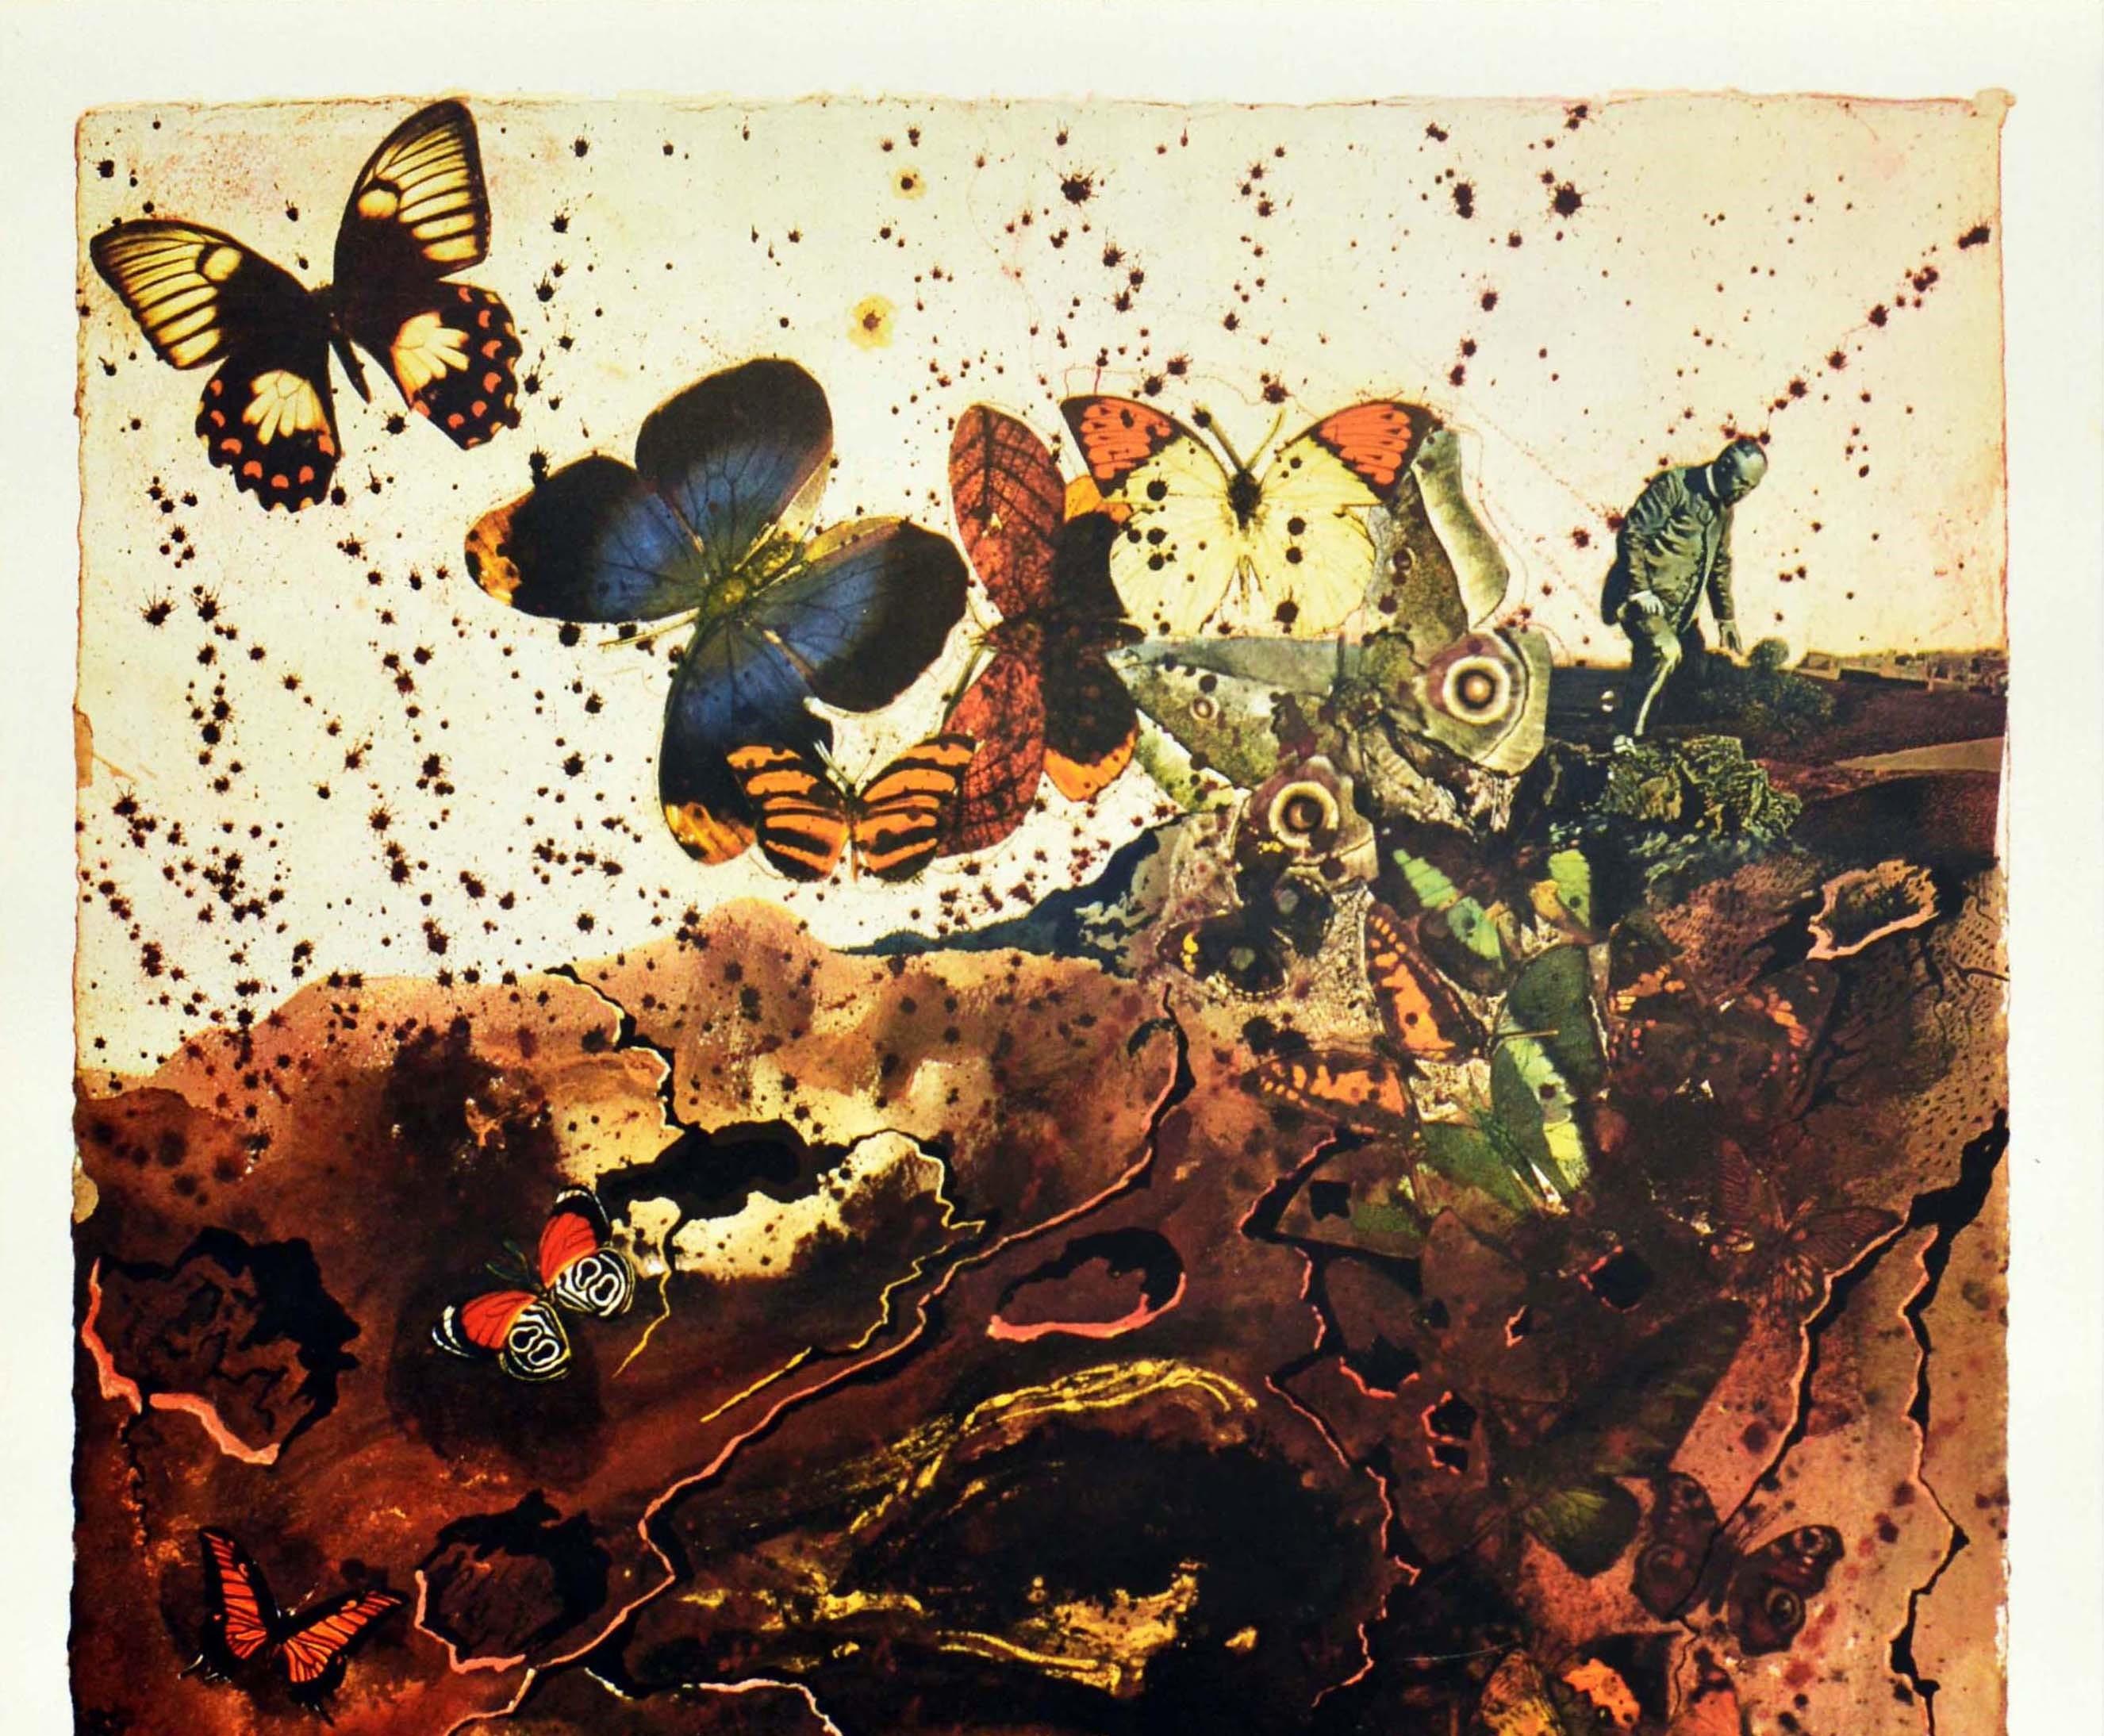 Original Vintage Railway Poster Auvergne By Dali For SNCF Butterfly Abstract Art - Print by Salvador Dalí